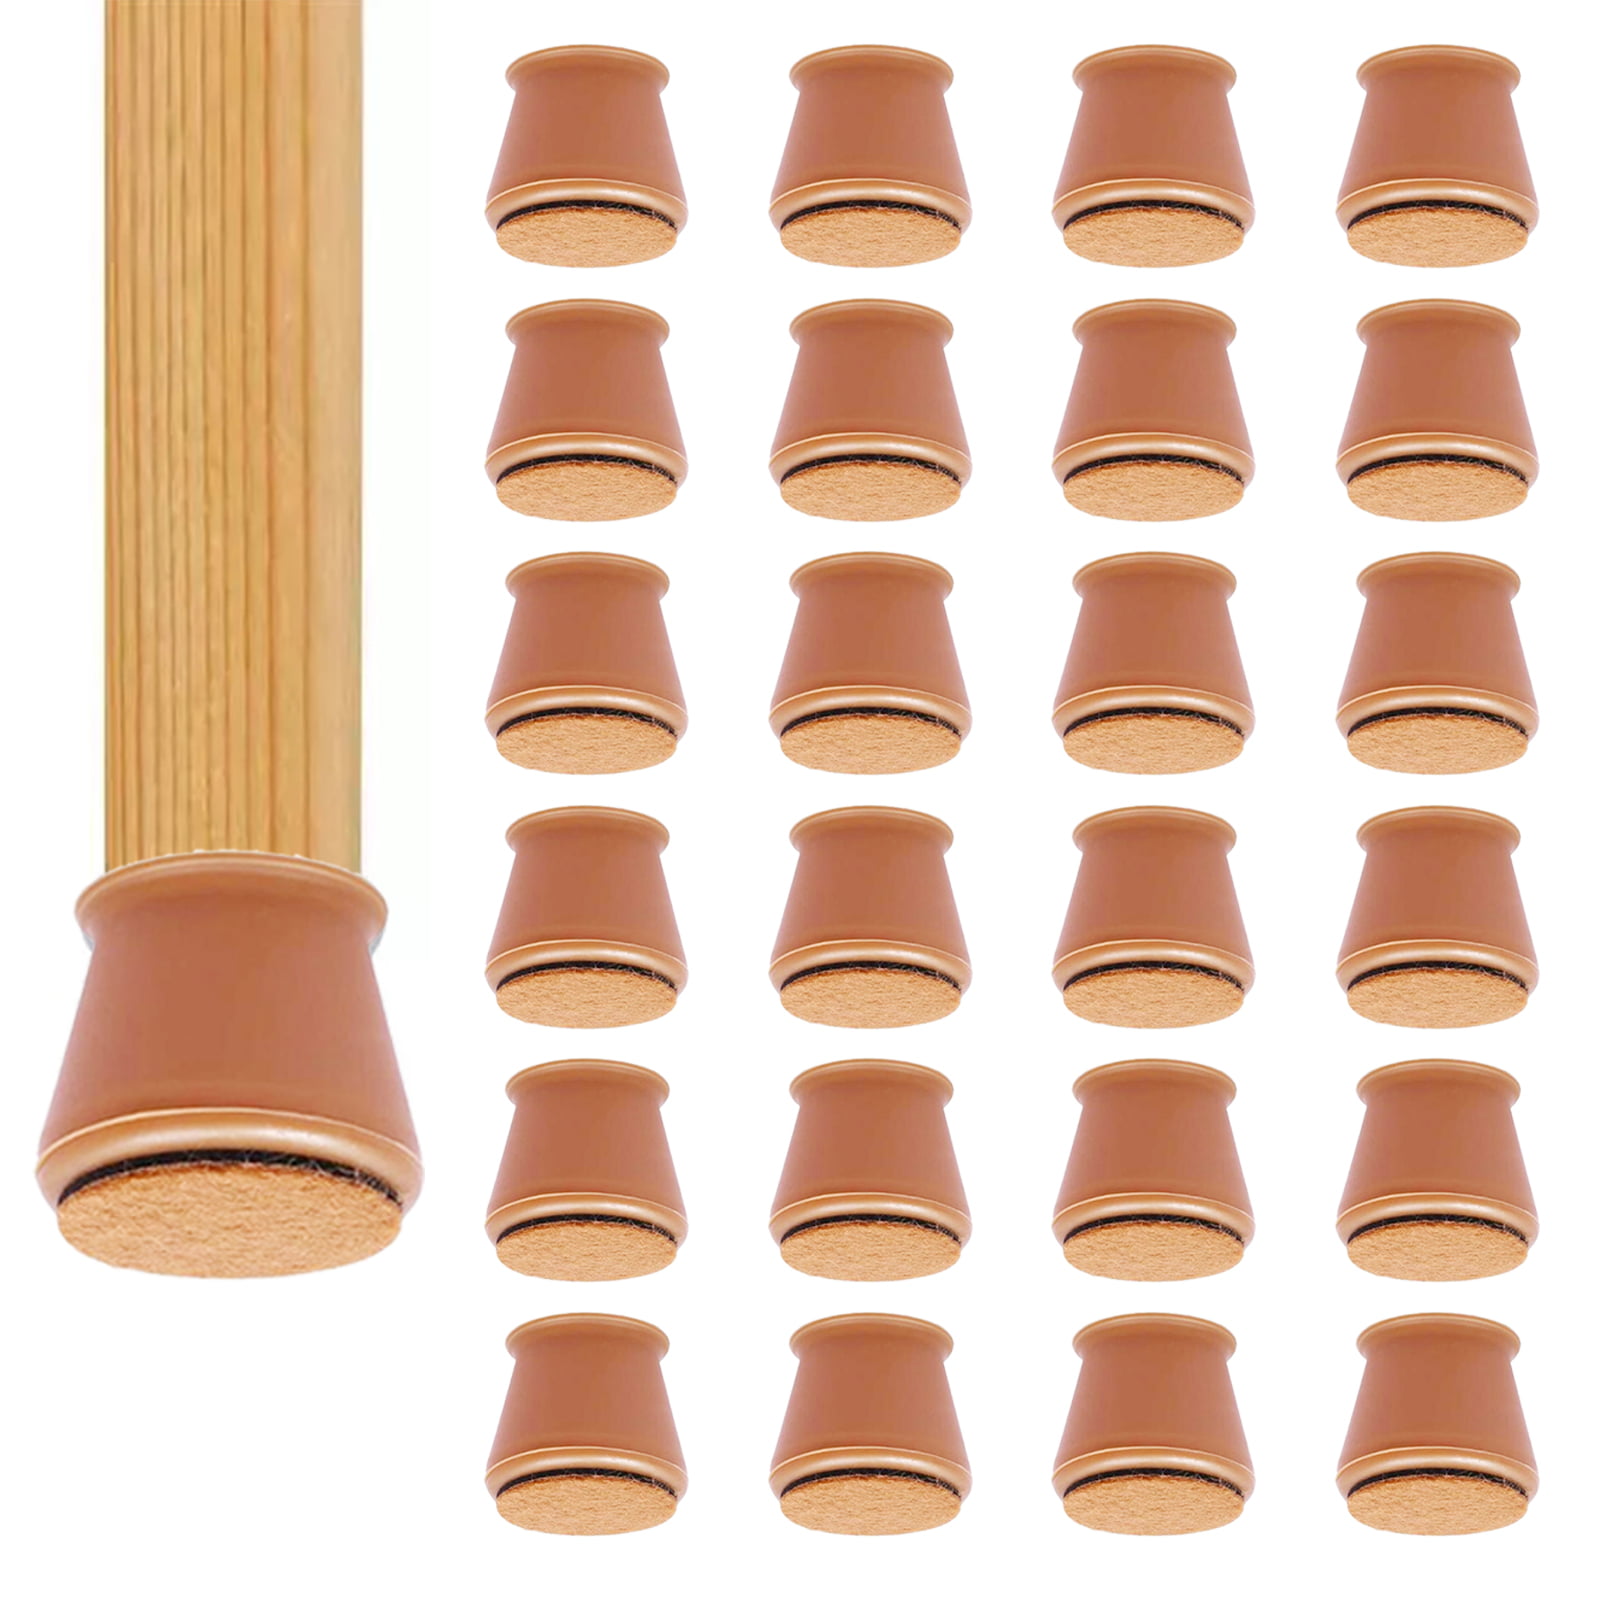 40Pcs Silicone Chair Leg Covers Upgrade Furniture Leg Caps with Felt Pads 